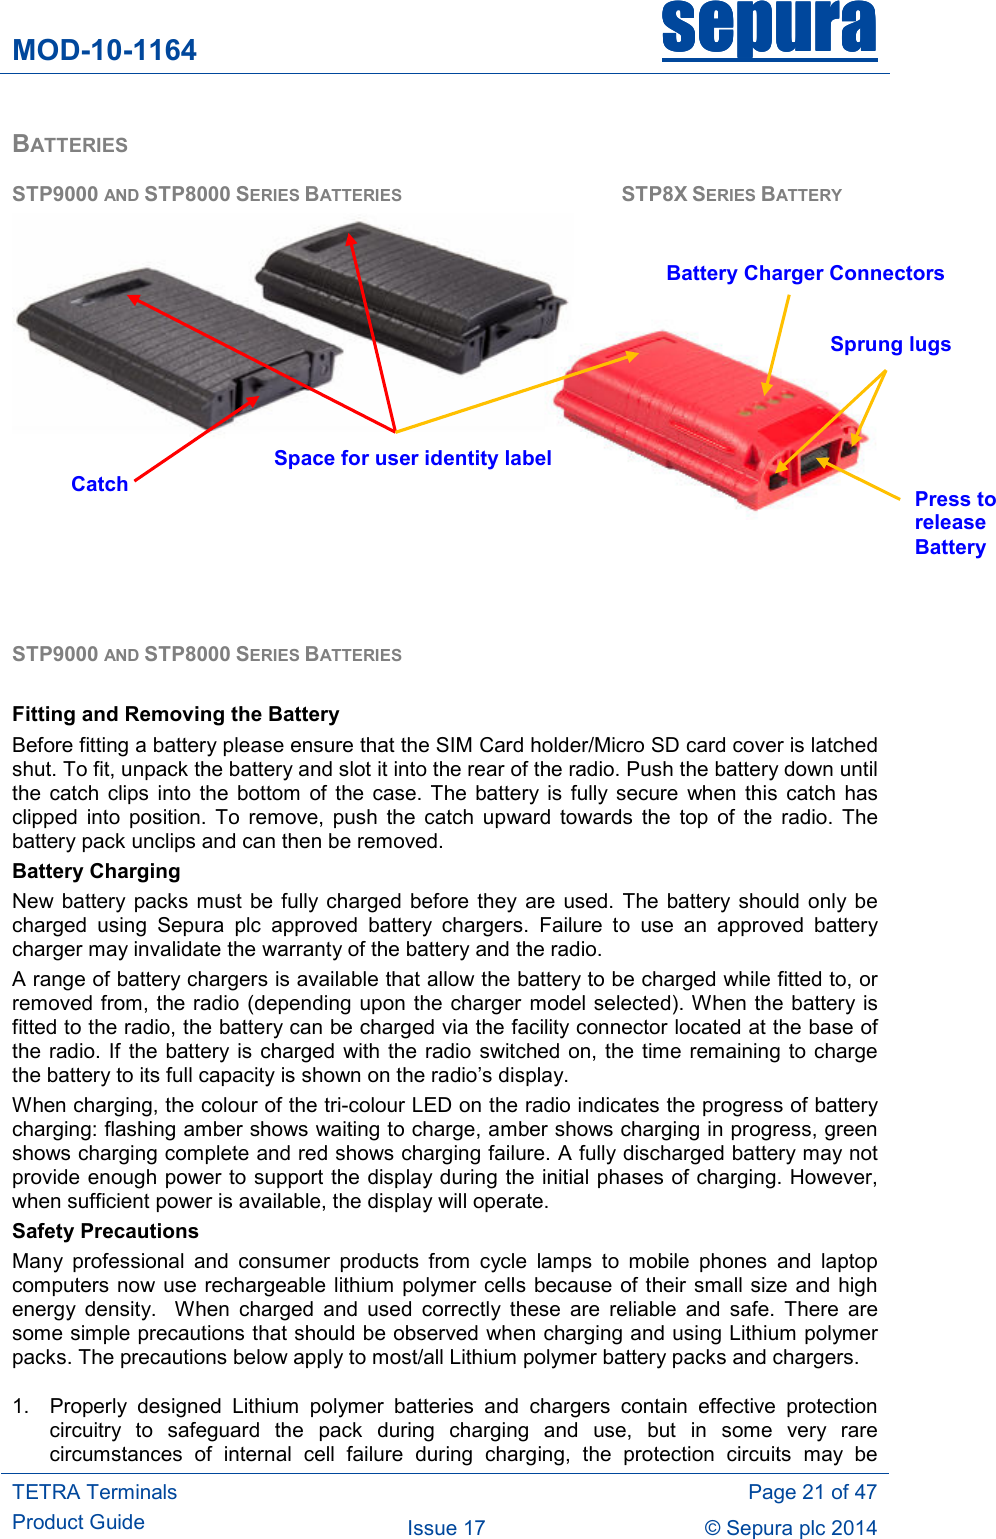 MOD-10-1164 sepurasepurasepurasepura     TETRA Terminals Product Guide   Page 21 of 47 Issue 17  © Sepura plc 2014   BATTERIES STP9000 AND STP8000 SERIES BATTERIES       STP8X SERIES BATTERY    STP9000 AND STP8000 SERIES BATTERIES   Fitting and Removing the Battery Before fitting a battery please ensure that the SIM Card holder/Micro SD card cover is latched shut. To fit, unpack the battery and slot it into the rear of the radio. Push the battery down until the  catch  clips  into the  bottom  of  the case.  The  battery  is  fully secure  when  this  catch  has clipped  into  position.  To  remove,  push  the  catch  upward  towards  the  top  of  the  radio.  The battery pack unclips and can then be removed. Battery Charging New  battery  packs must be fully charged before  they are  used.  The  battery  should only be charged  using  Sepura  plc  approved  battery  chargers.  Failure  to  use  an  approved  battery charger may invalidate the warranty of the battery and the radio. A range of battery chargers is available that allow the battery to be charged while fitted to, or removed from, the radio (depending upon the charger model selected). When the battery is fitted to the radio, the battery can be charged via the facility connector located at the base of the radio. If the battery  is charged  with the  radio  switched on, the time remaining to charge the battery to its full capacity is shown on the radio’s display. When charging, the colour of the tri-colour LED on the radio indicates the progress of battery charging: flashing amber shows waiting to charge, amber shows charging in progress, green shows charging complete and red shows charging failure. A fully discharged battery may not provide enough power to support the display during the initial phases of charging. However, when sufficient power is available, the display will operate. Safety Precautions Many  professional  and  consumer  products  from  cycle  lamps  to  mobile  phones  and  laptop computers now  use rechargeable  lithium polymer cells because of their small size and high energy  density.    When  charged  and  used  correctly  these  are  reliable  and  safe.  There  are some simple precautions that should be observed when charging and using Lithium polymer packs. The precautions below apply to most/all Lithium polymer battery packs and chargers. 1.  Properly  designed  Lithium  polymer  batteries  and  chargers  contain  effective  protection circuitry  to  safeguard  the  pack  during  charging  and  use,  but  in  some  very  rare circumstances  of  internal  cell  failure  during  charging,  the  protection  circuits  may  be Space for user identity label Battery Charger Connectors Press to release Battery   Sprung lugs Catch 